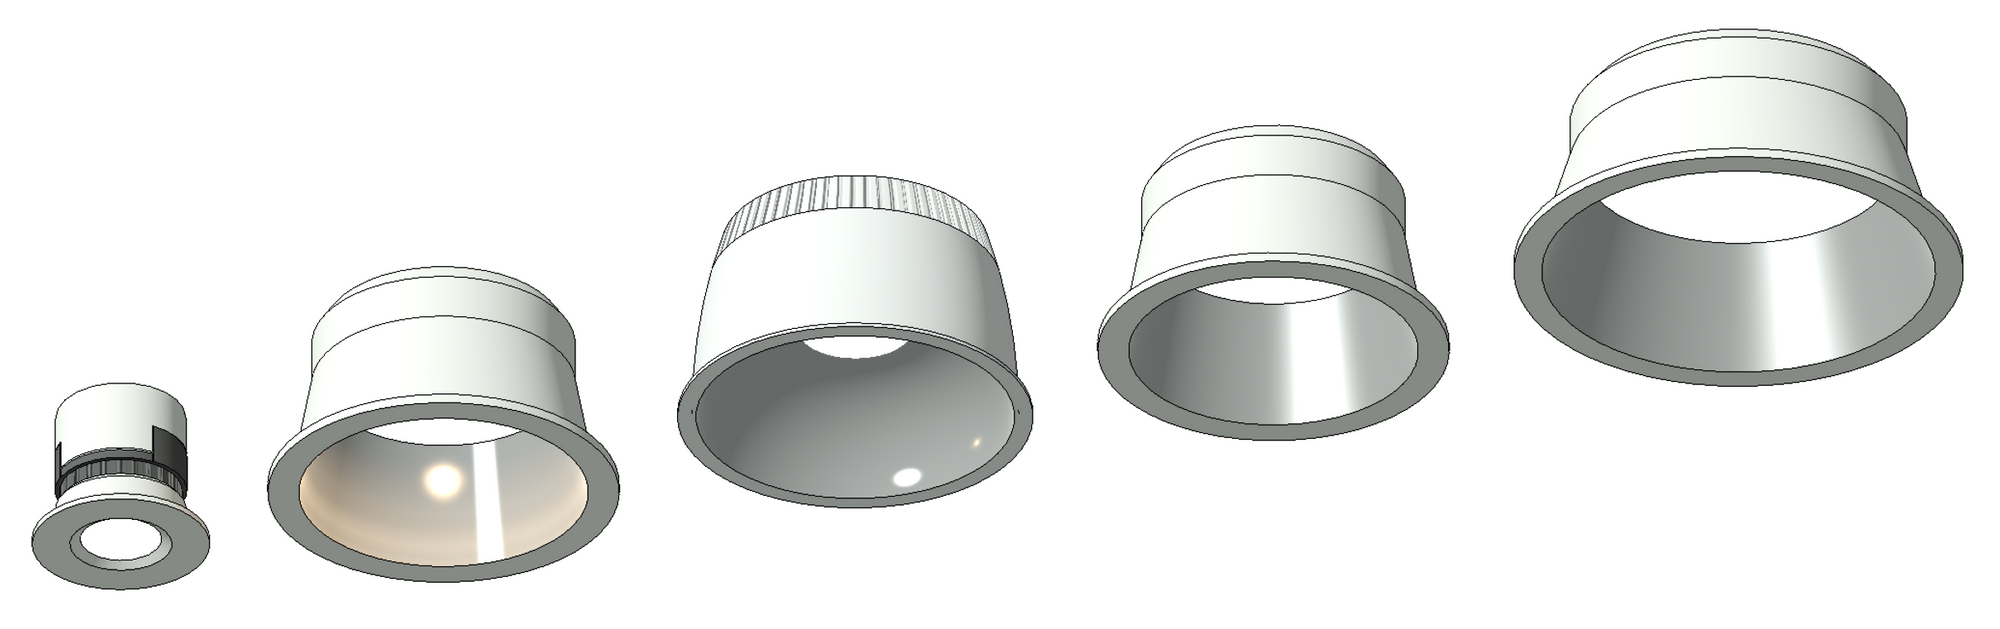 Image showing downlights from underside.